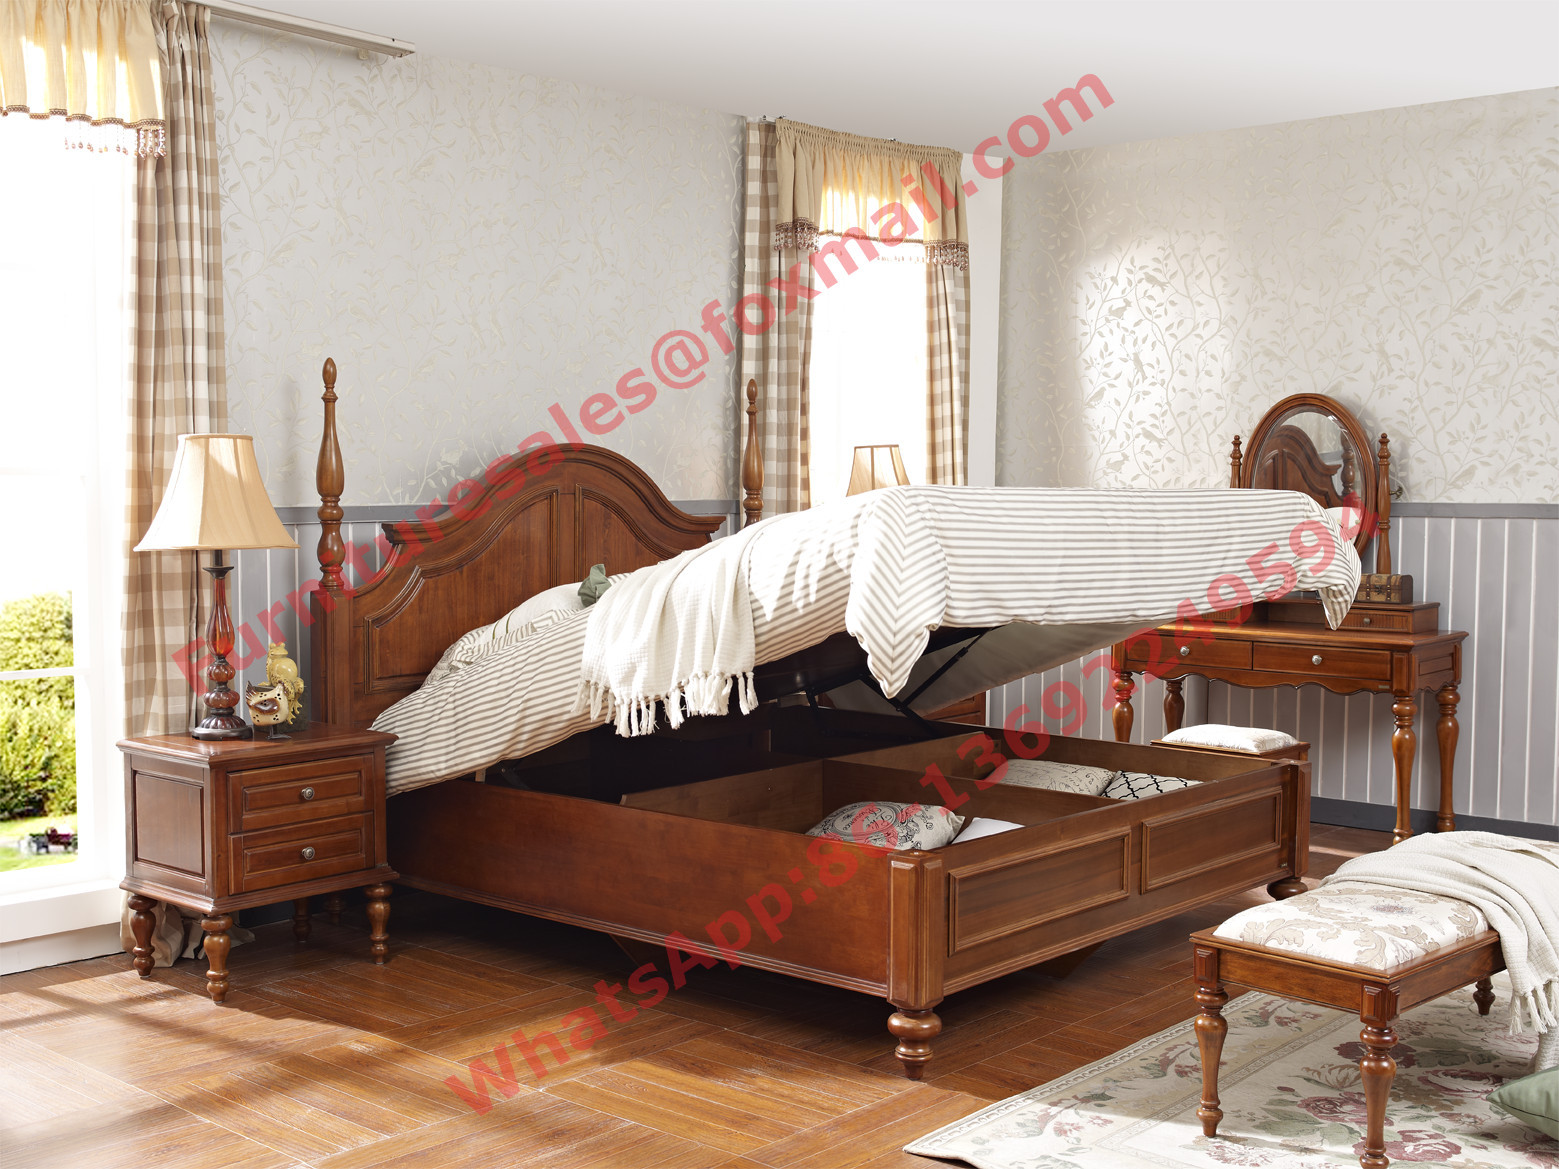 Best Ancient Rome style Solid Wood Bed with Storage in Bedroom Furniture sets wholesale